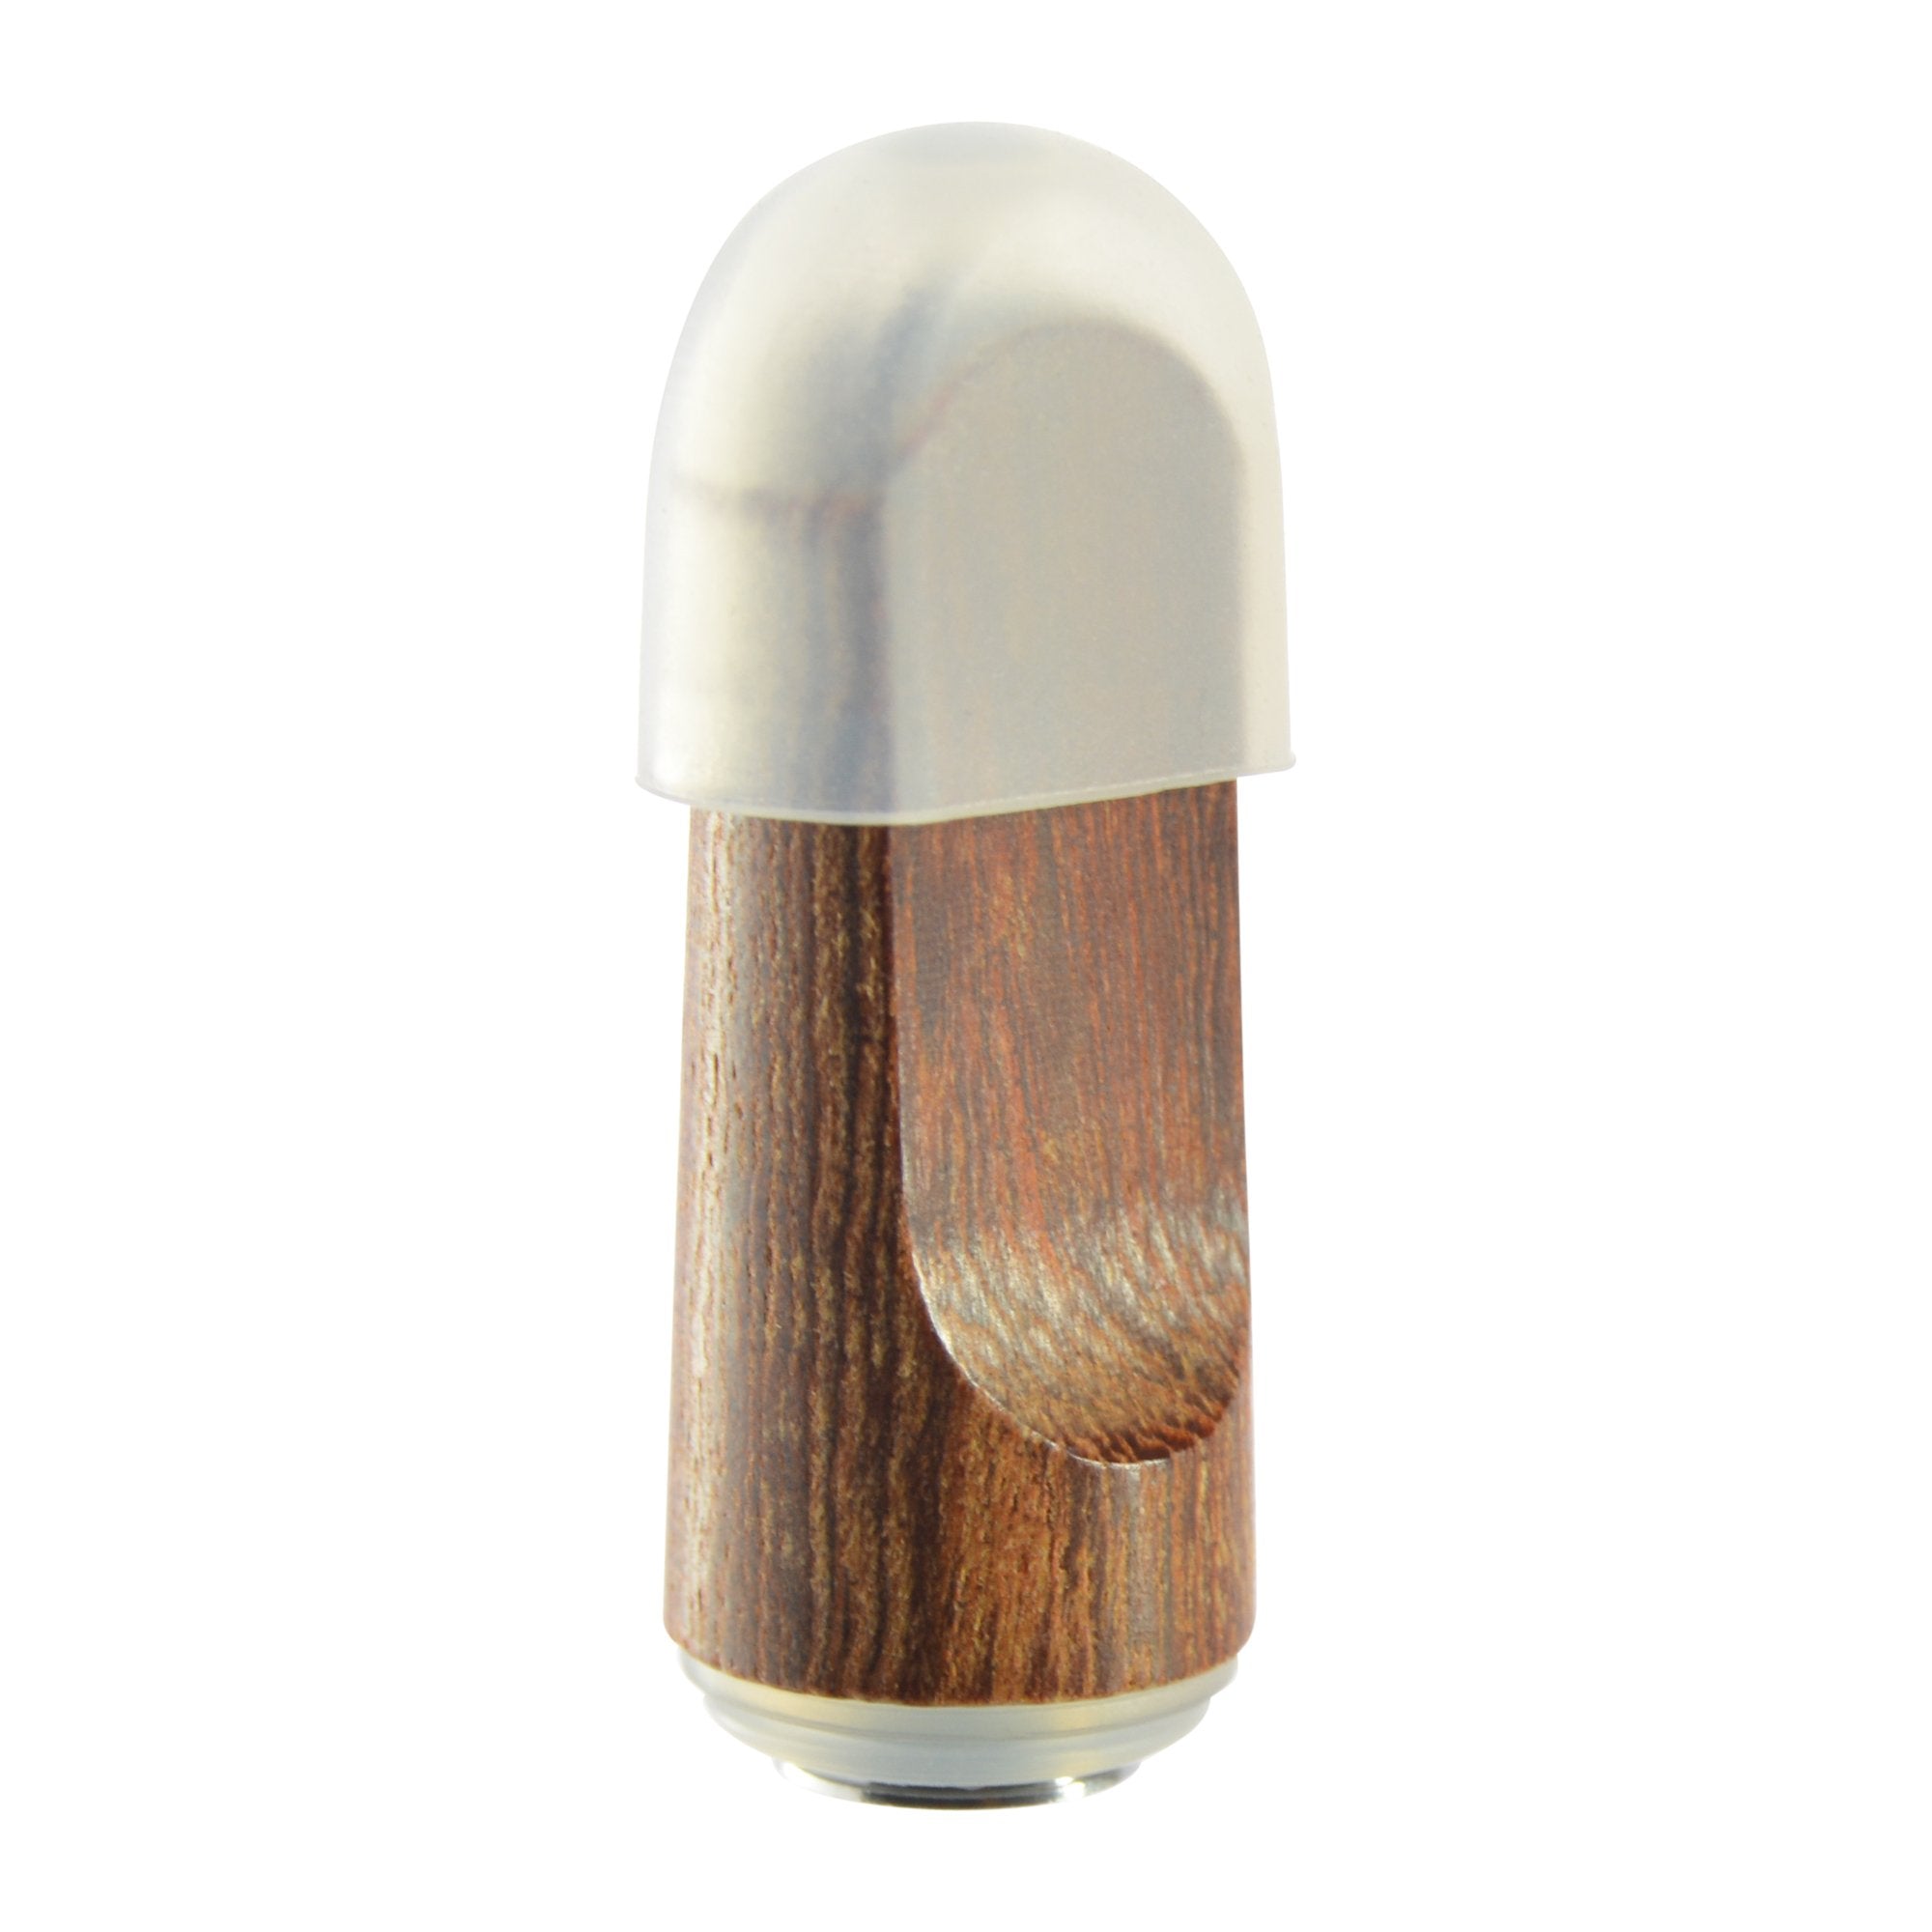 Wood Tips for CCELL Glass Cartridges - 200 Count - 5